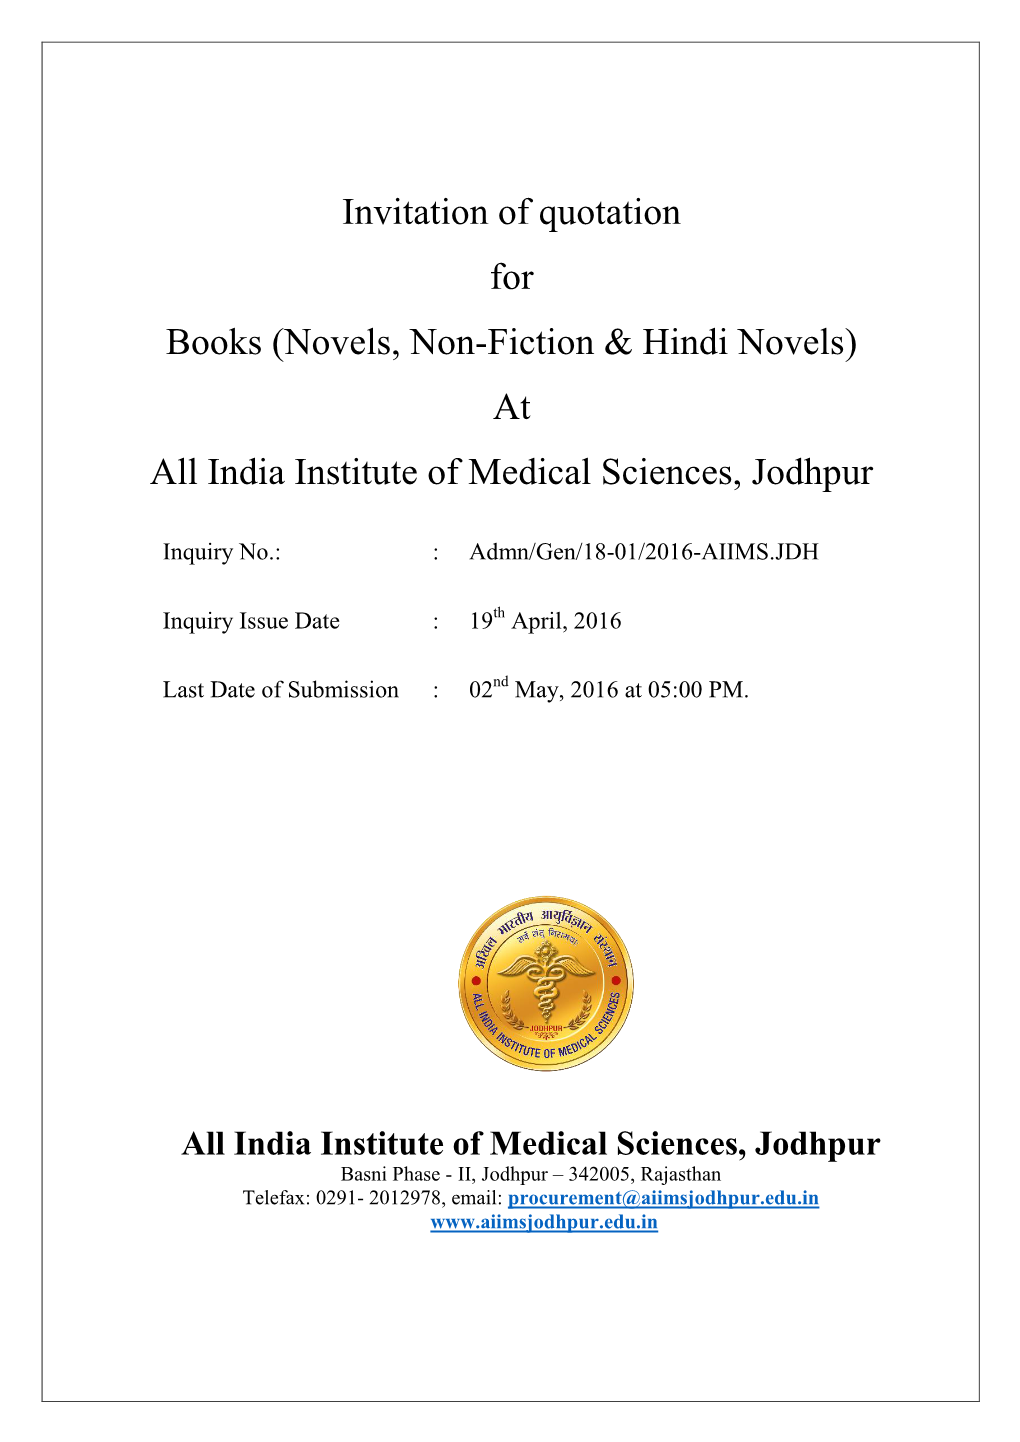 Invitation of Quotation for Books (Novels, Non-Fiction & Hindi Novels) at All India Institute of Medical Sciences, Jodhpur